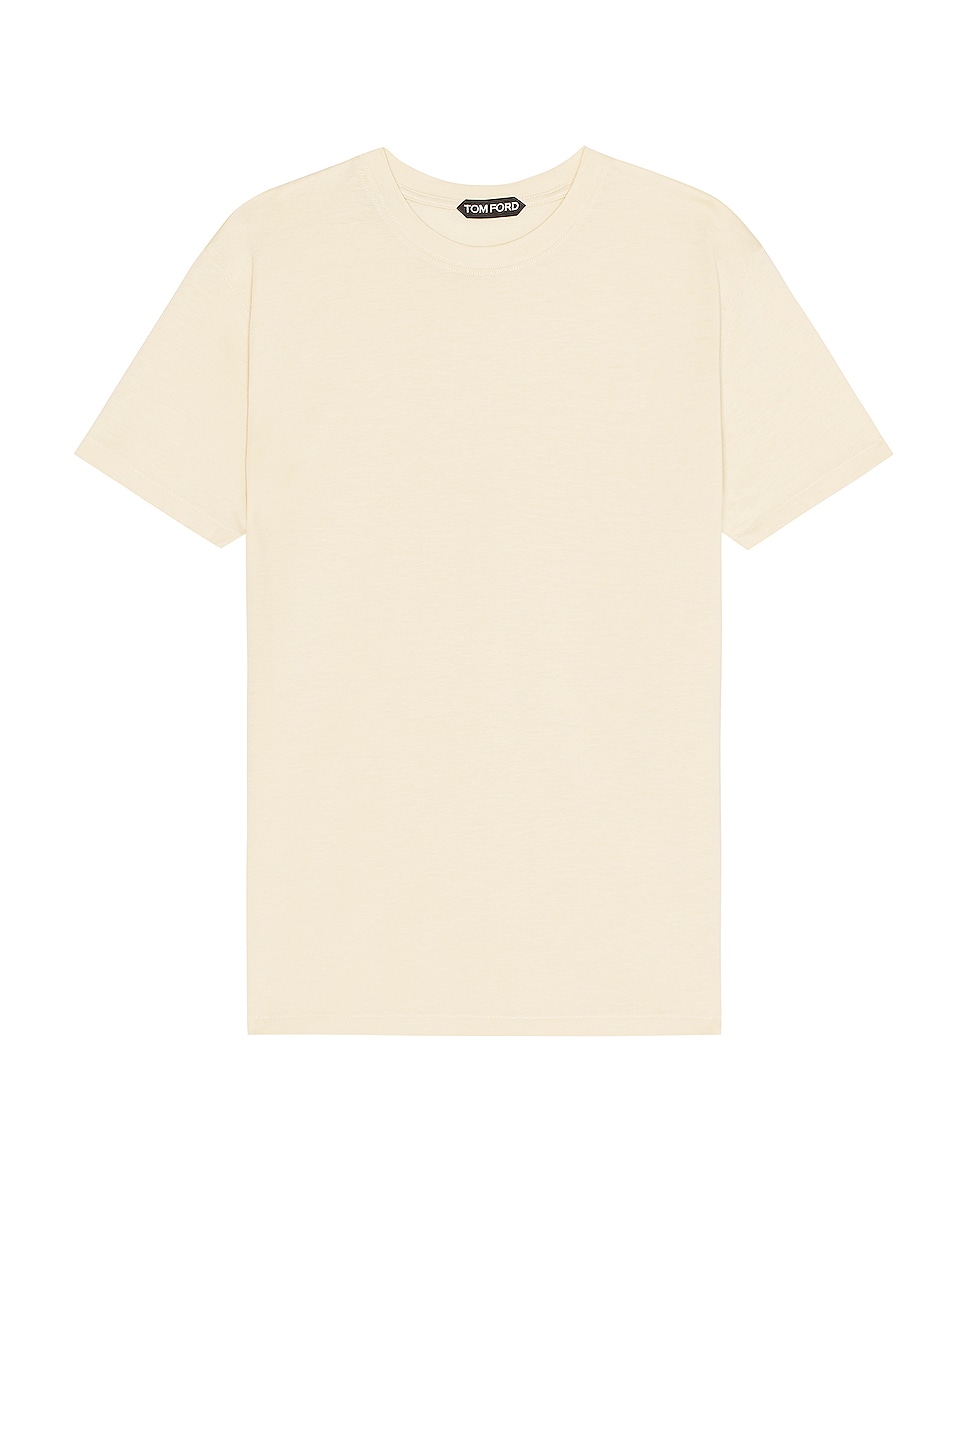 Image 1 of TOM FORD Lyocell Cotton Tee in Champagne